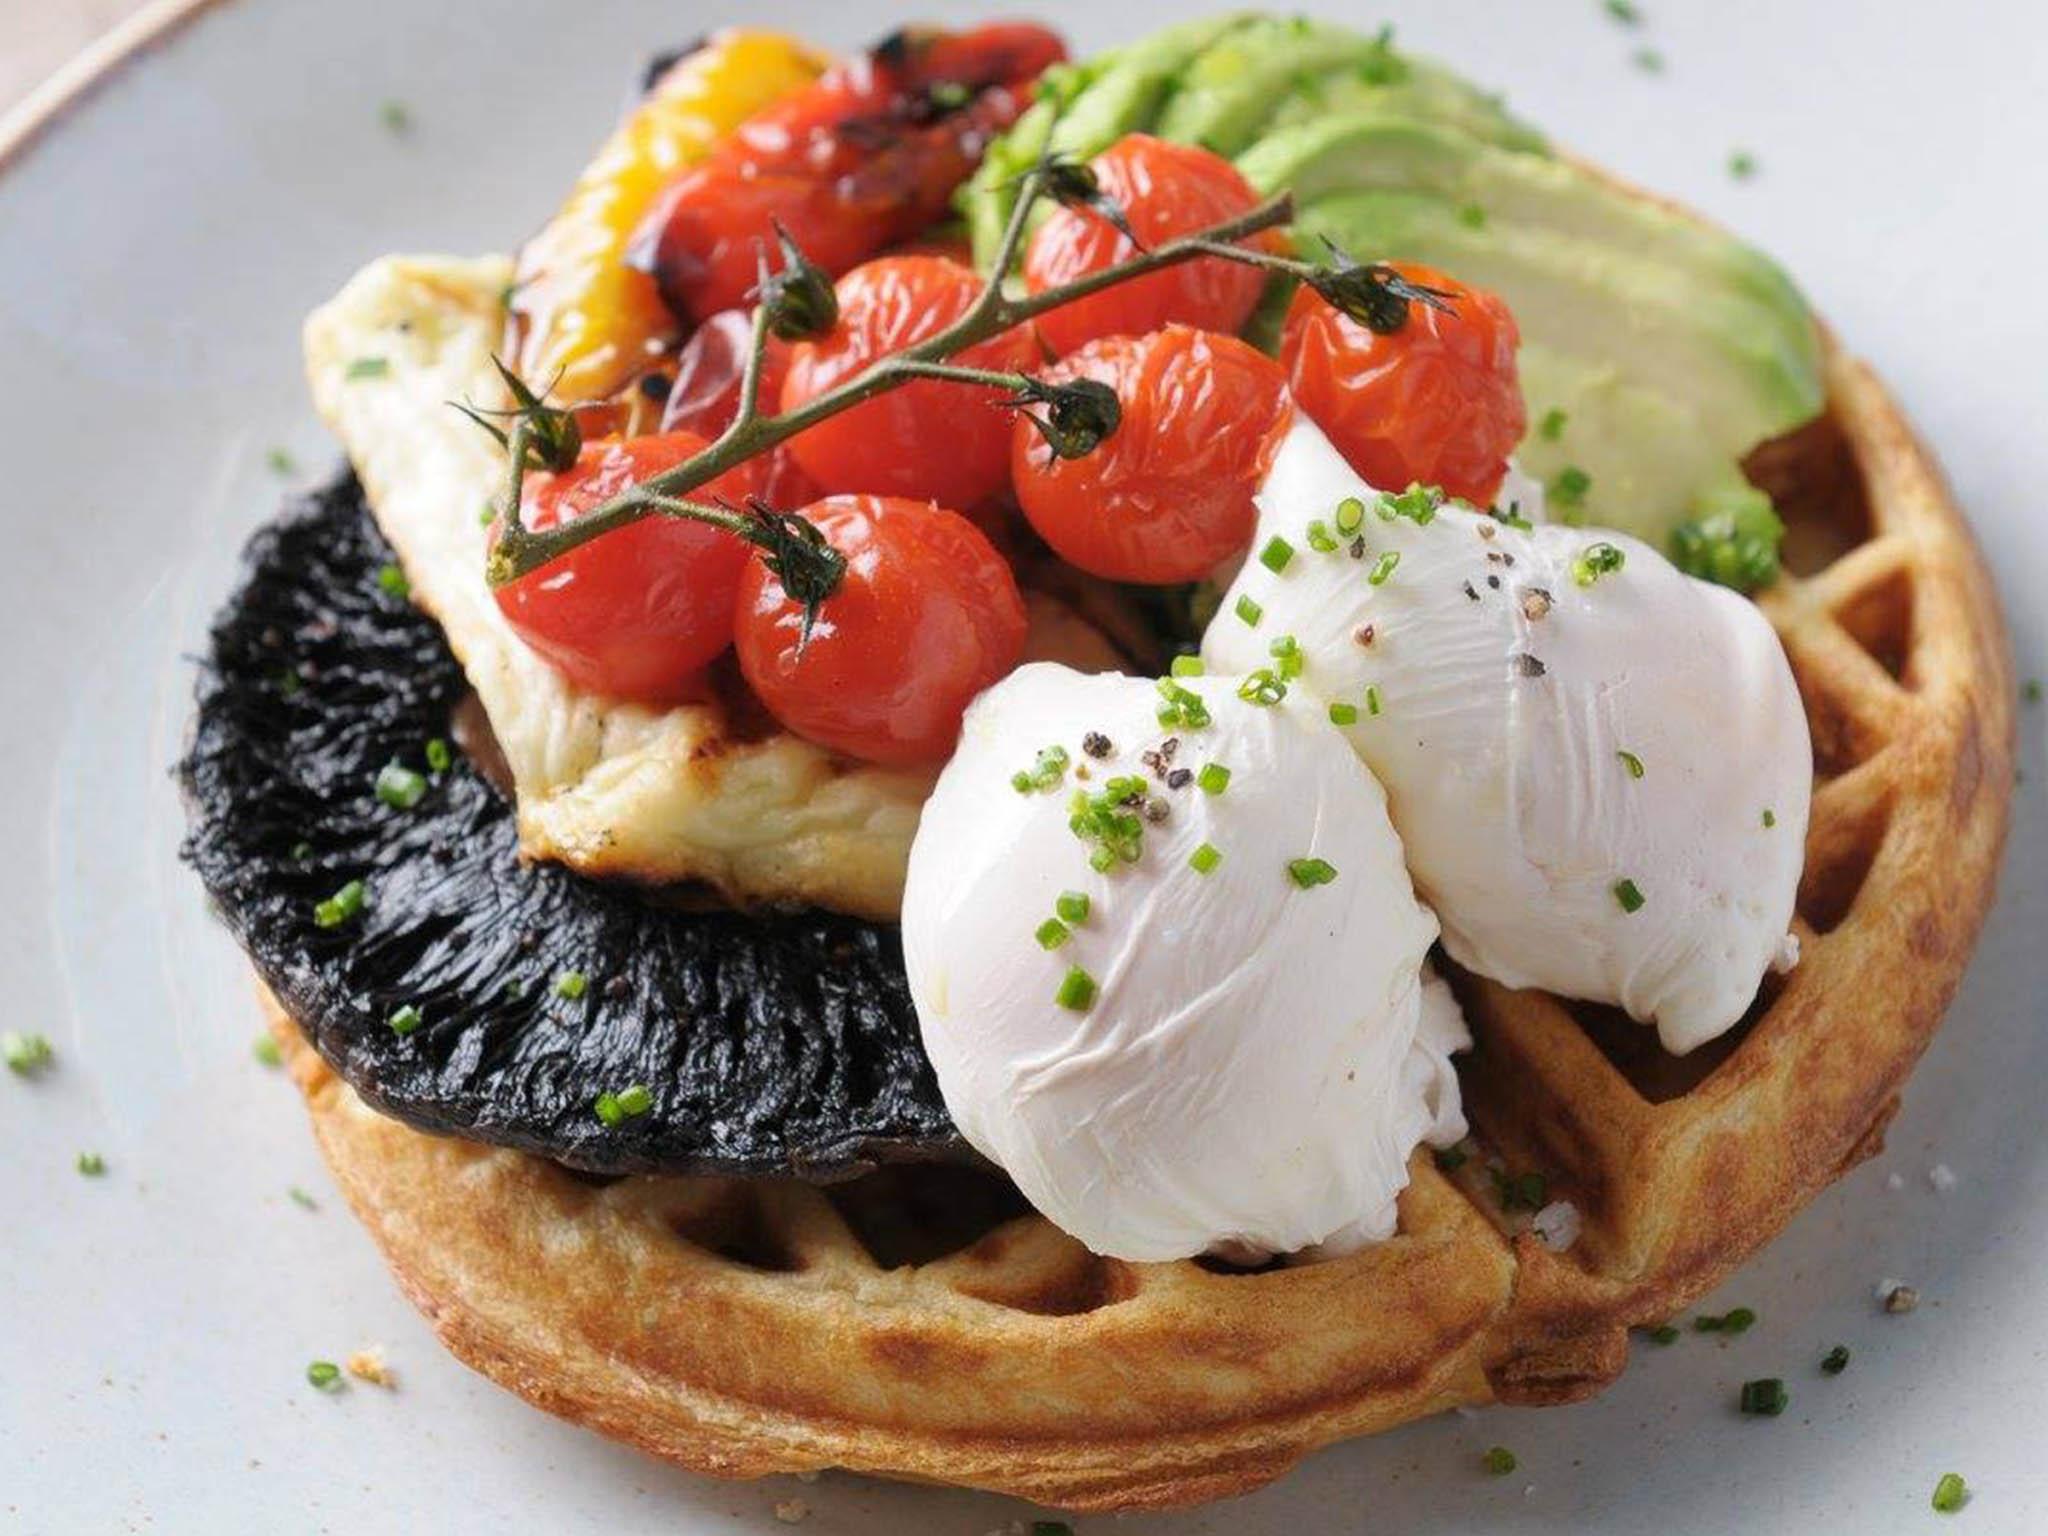 &#13;
Nordic cure: a waffle topped with eggs, chorizo, bacon, halloumi, avocado, pepper and beans &#13;